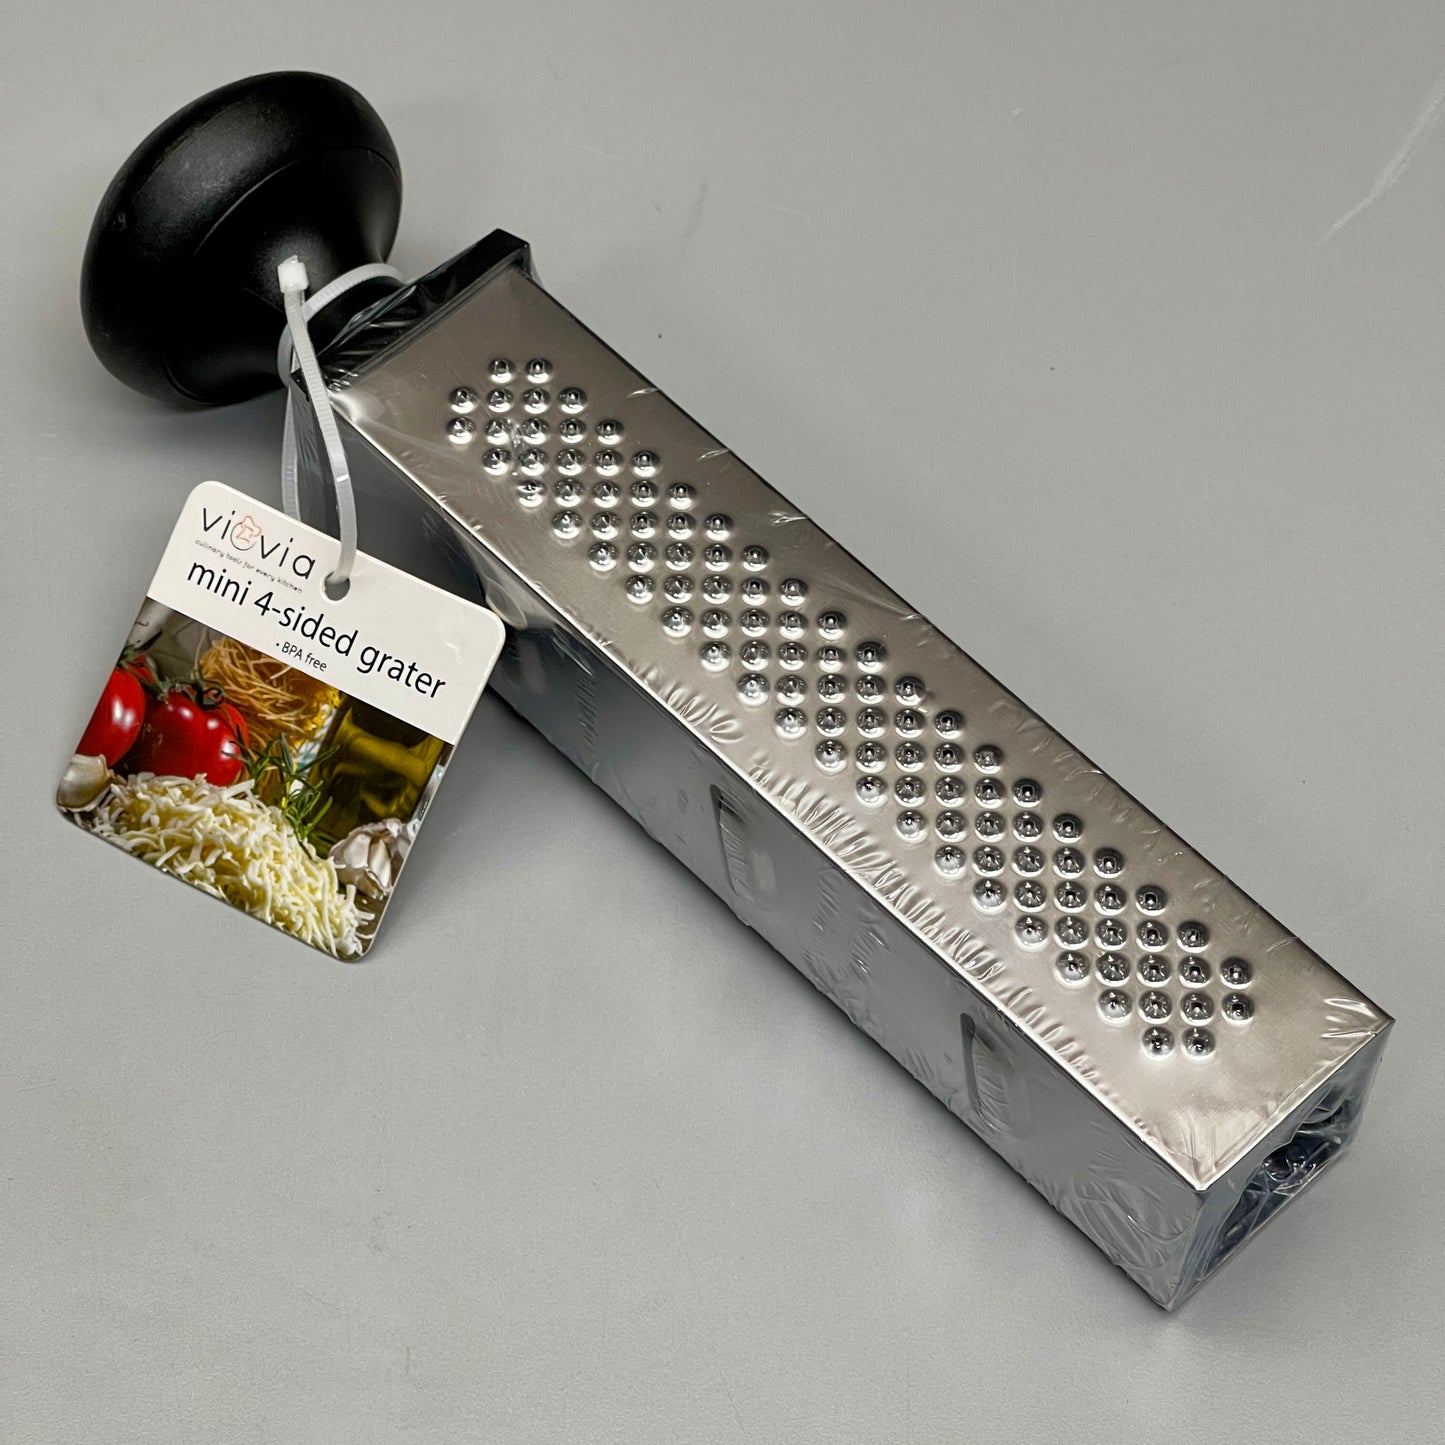 VIOVIA 2-PACK! Mini 4 Sided Grater Stainless Steel VIO-0967 (New)